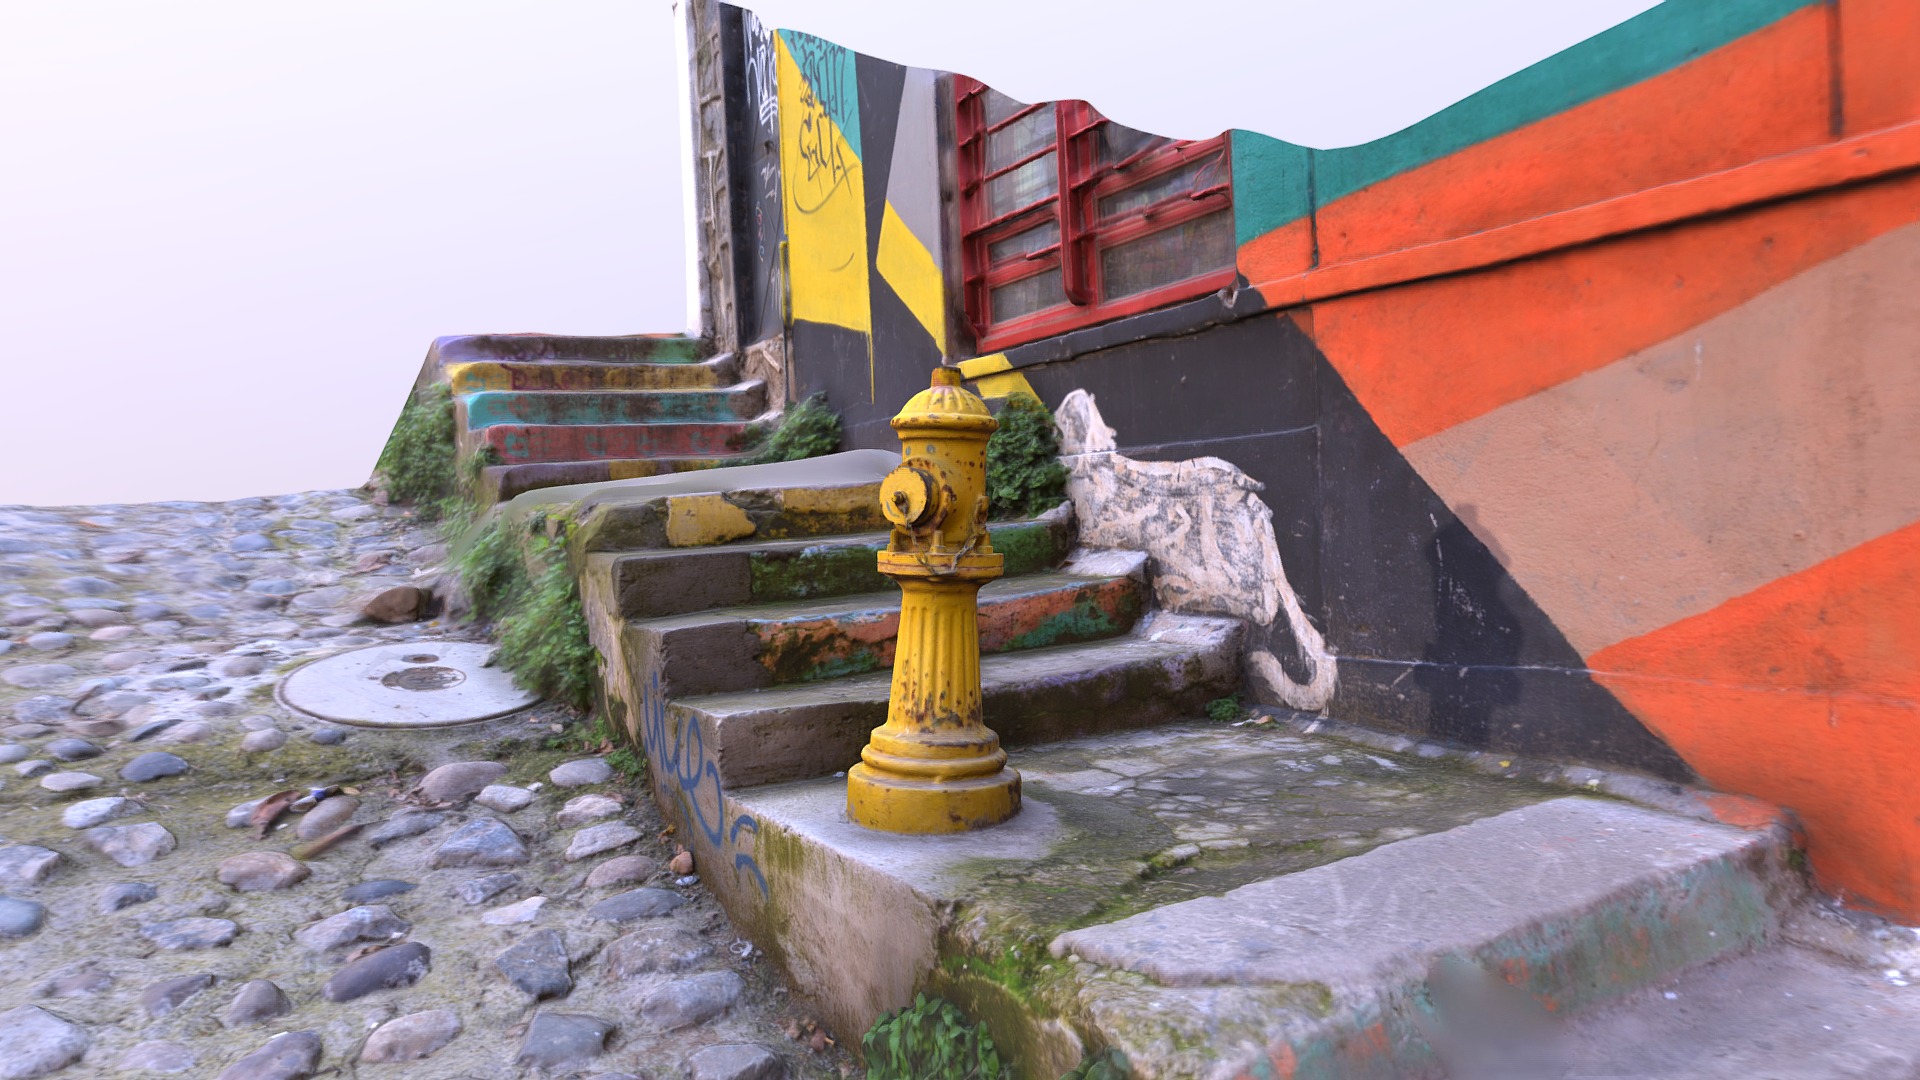 3D model Hydrant in Valparaiso, Chile - This is a 3D model of the Hydrant in Valparaiso, Chile. The 3D model is about a yellow fire hydrant.